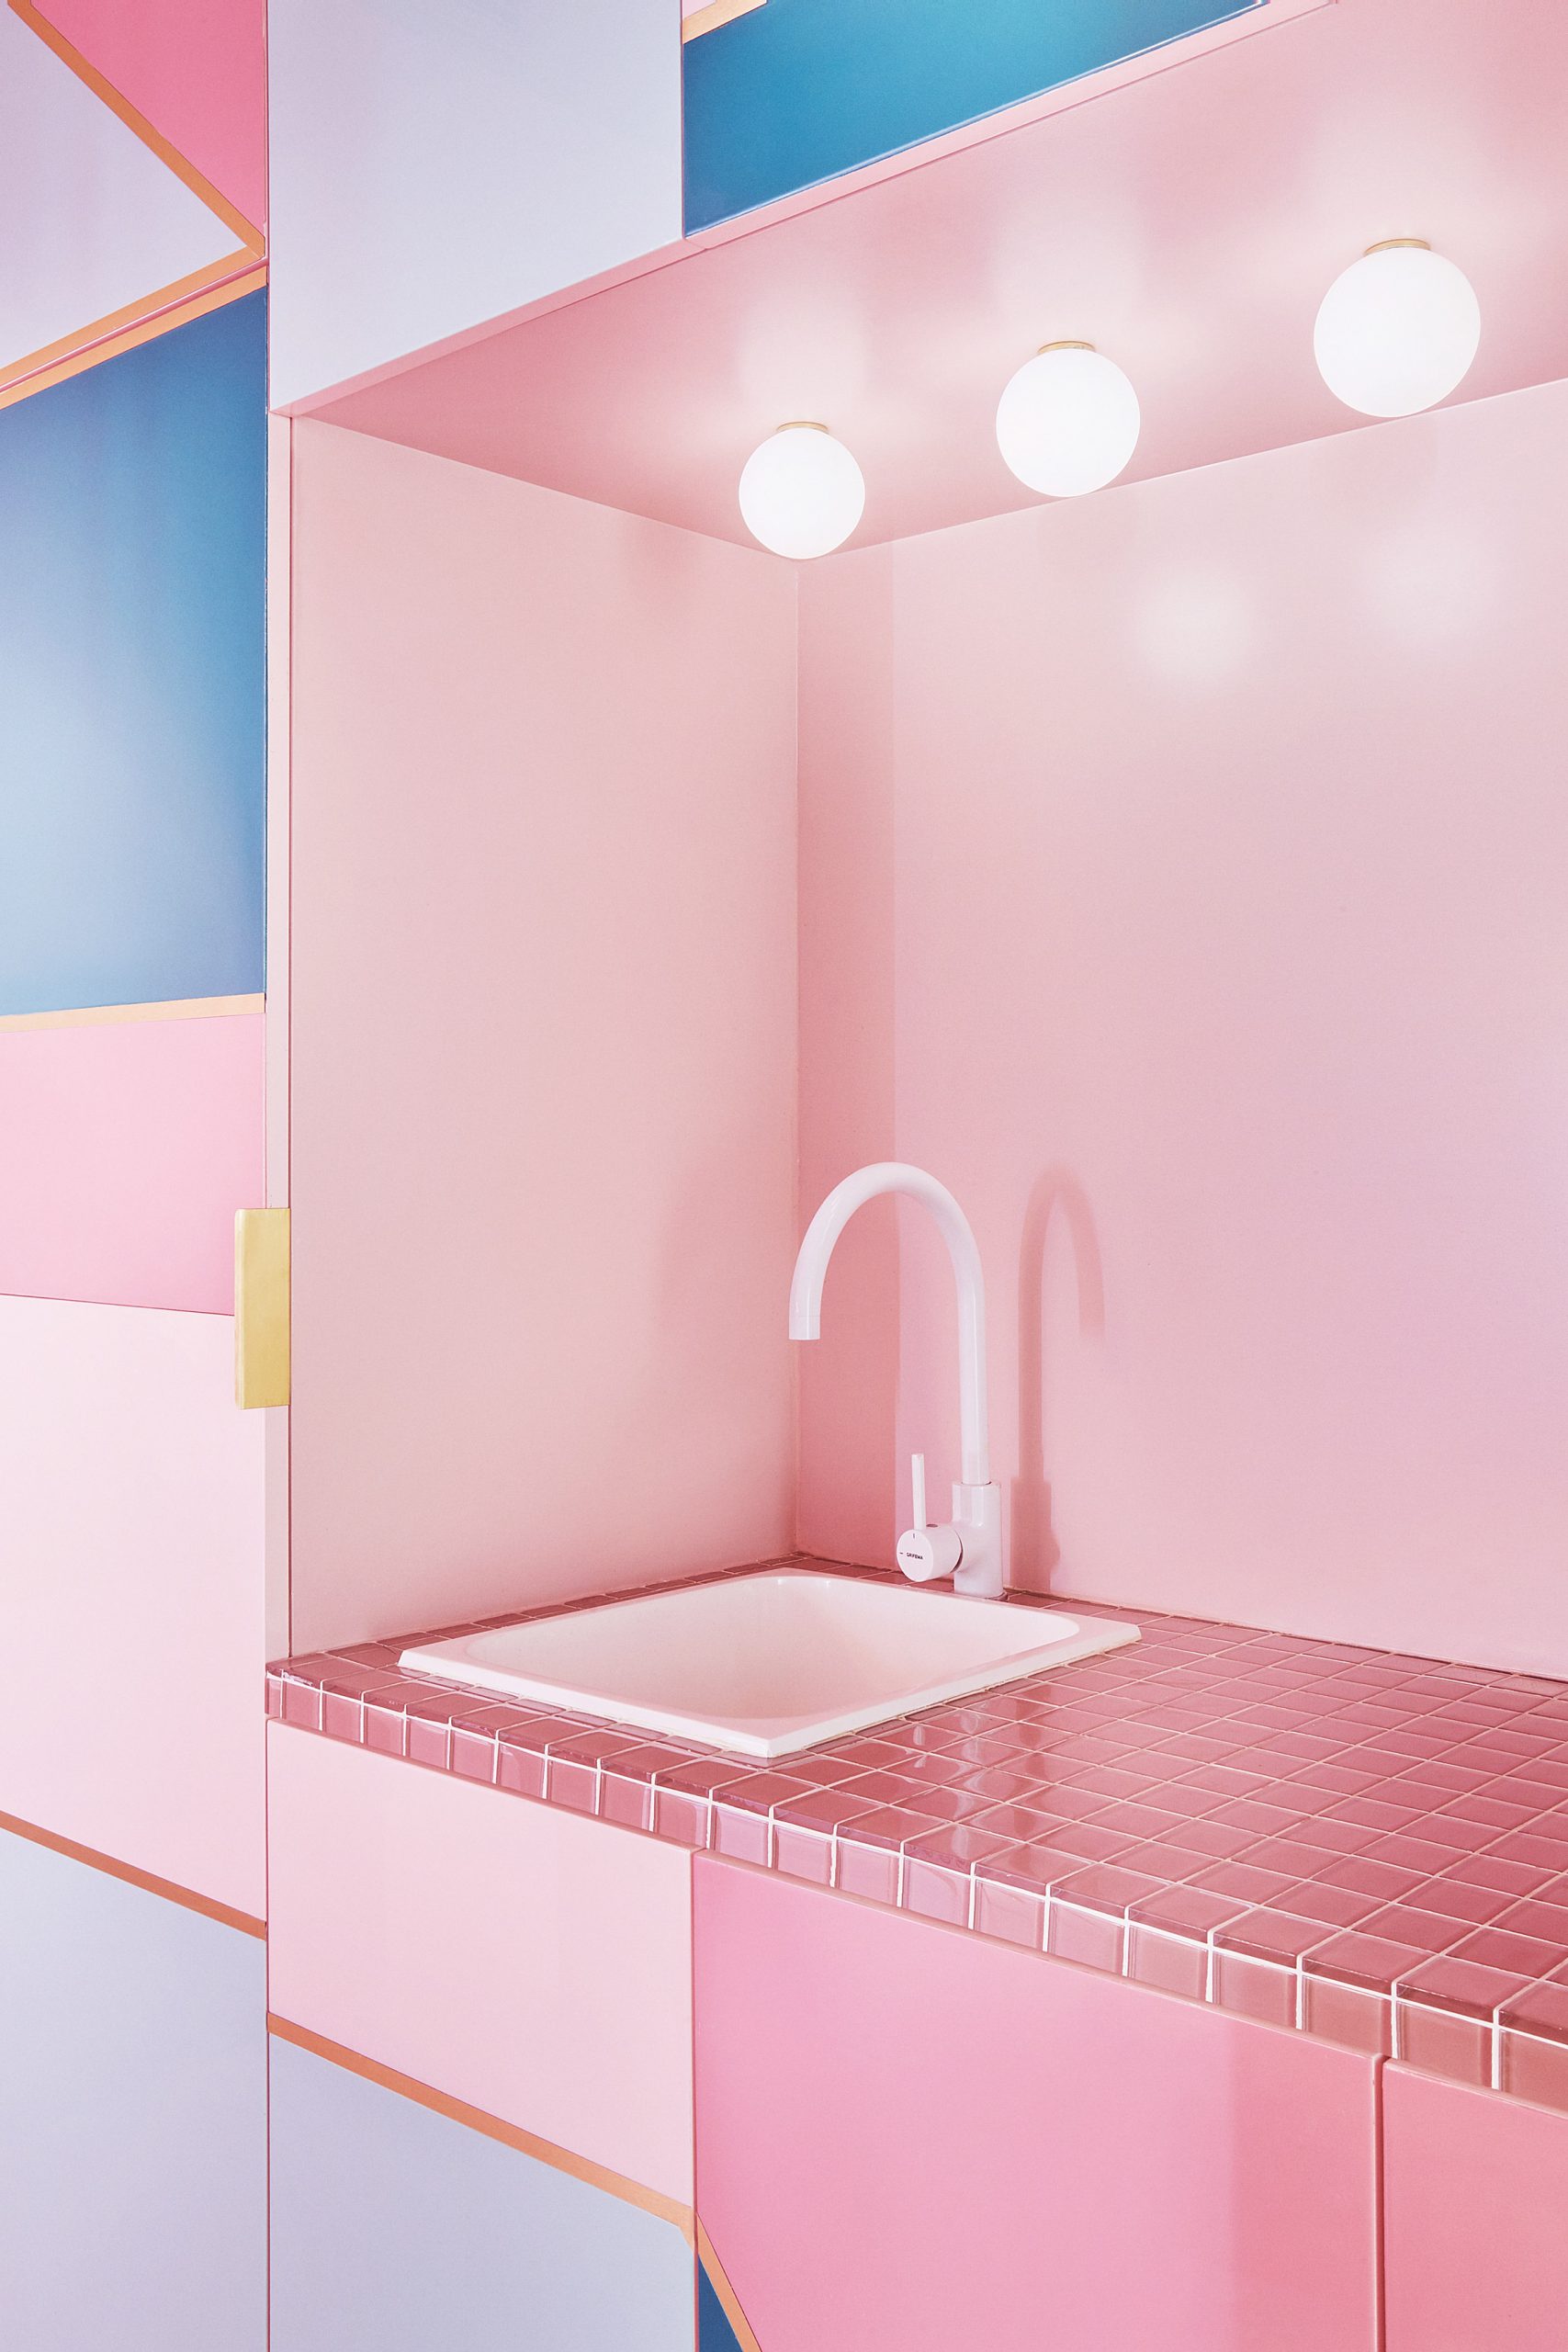 Kitchen of Minimal Fantasy, a pink apartment in Madrid